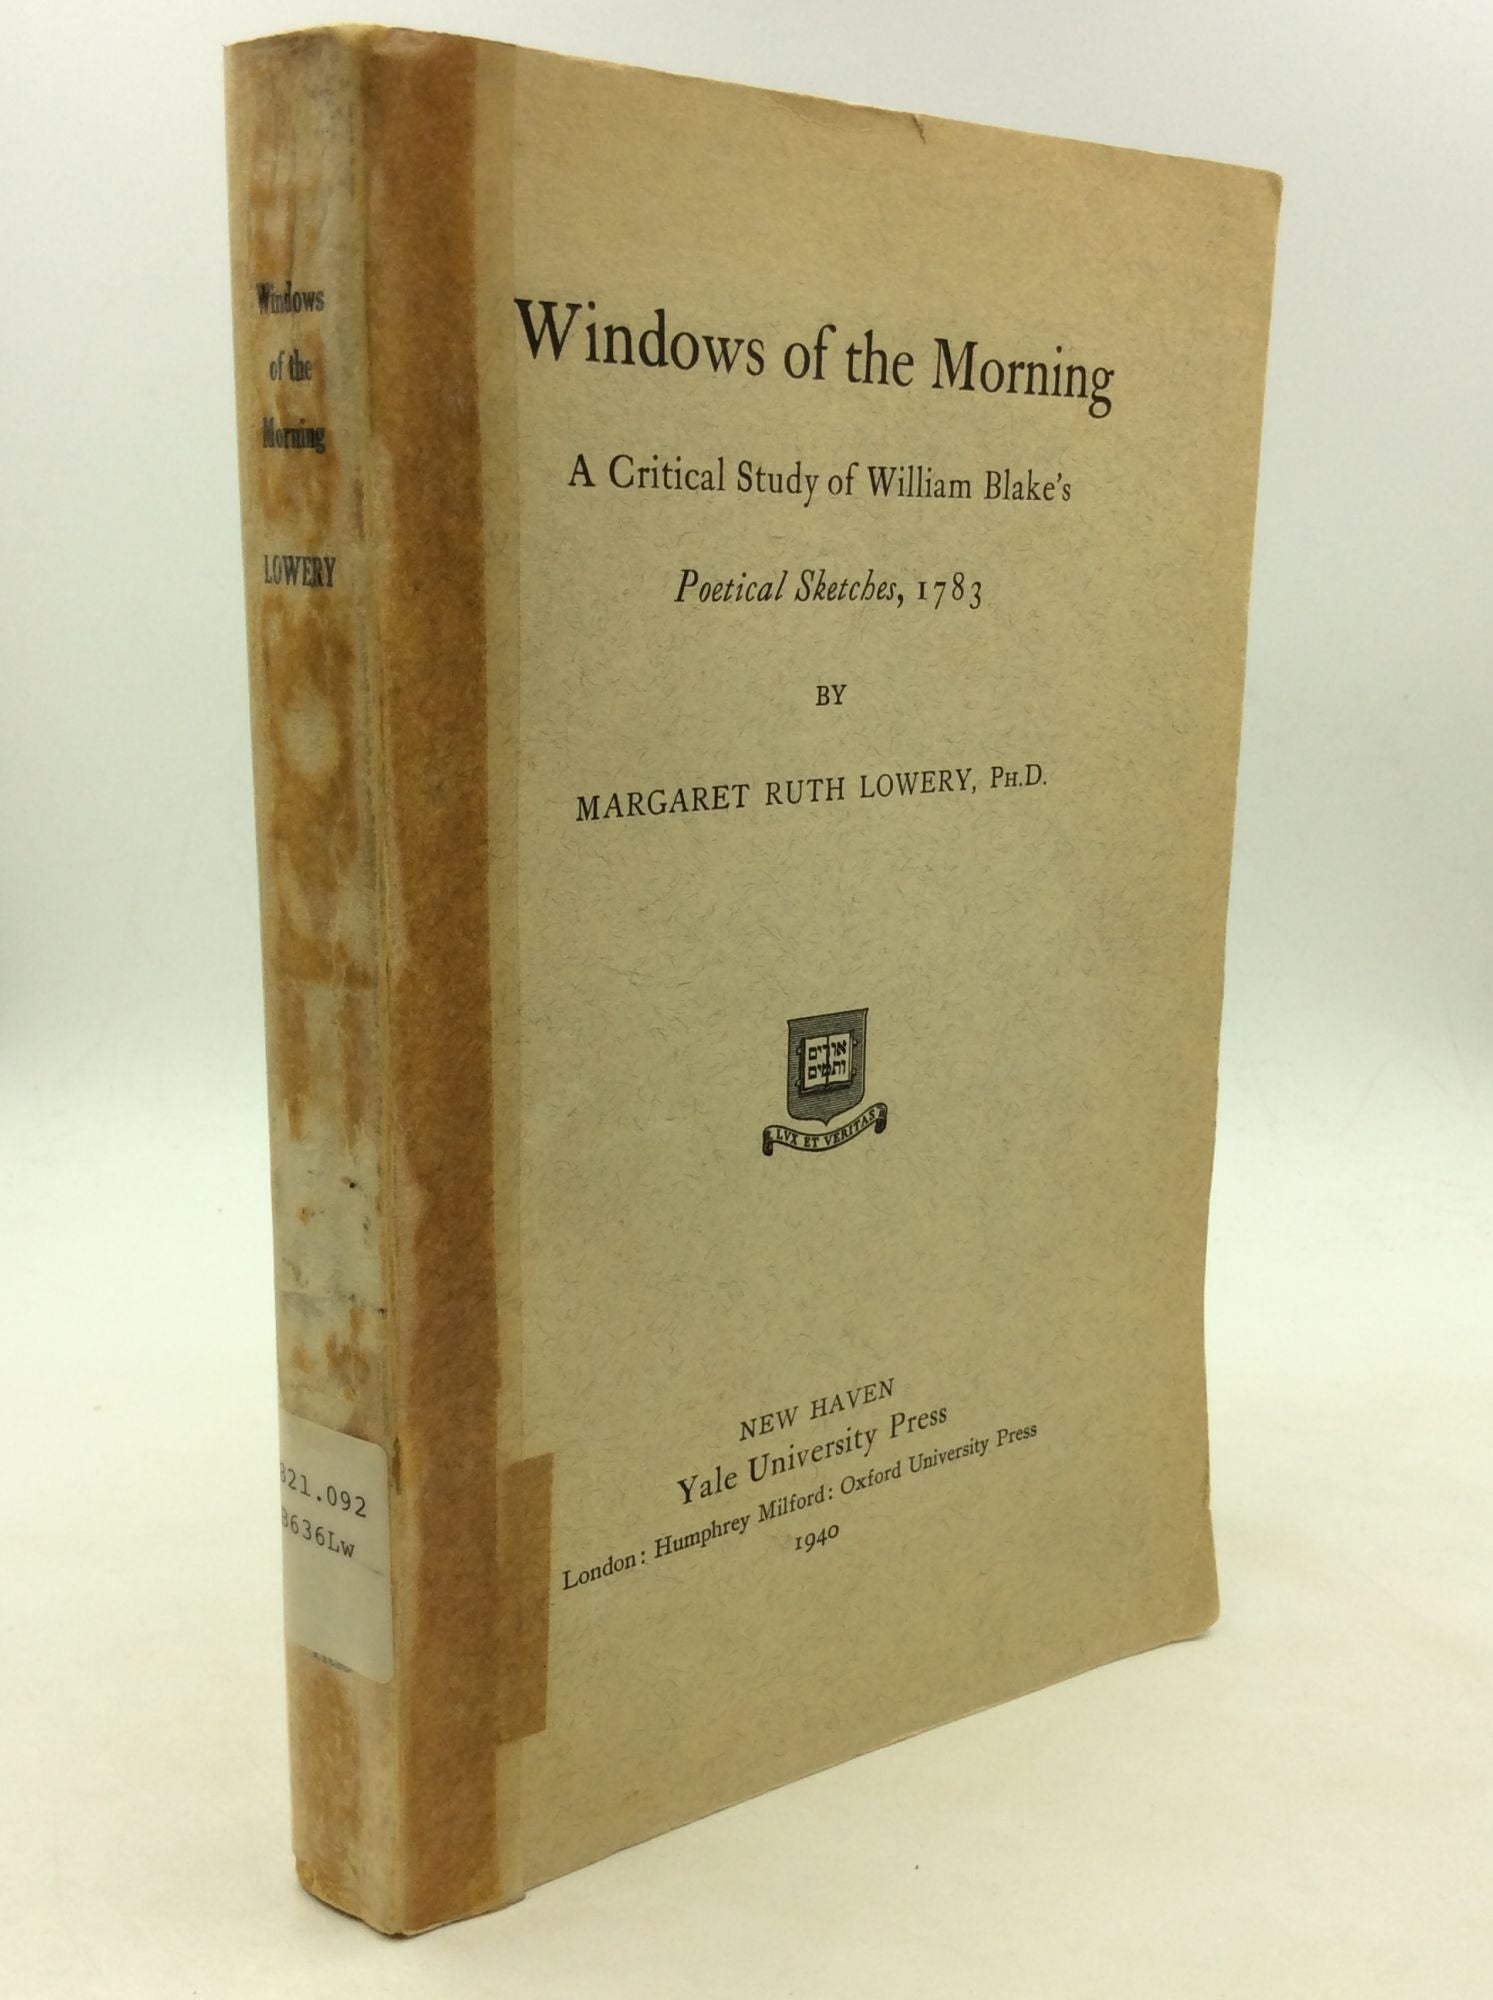 Margaret Ruth Lowery - Windows of the Morning: A Critical Study of William Blake's Poetical Sketches 1783